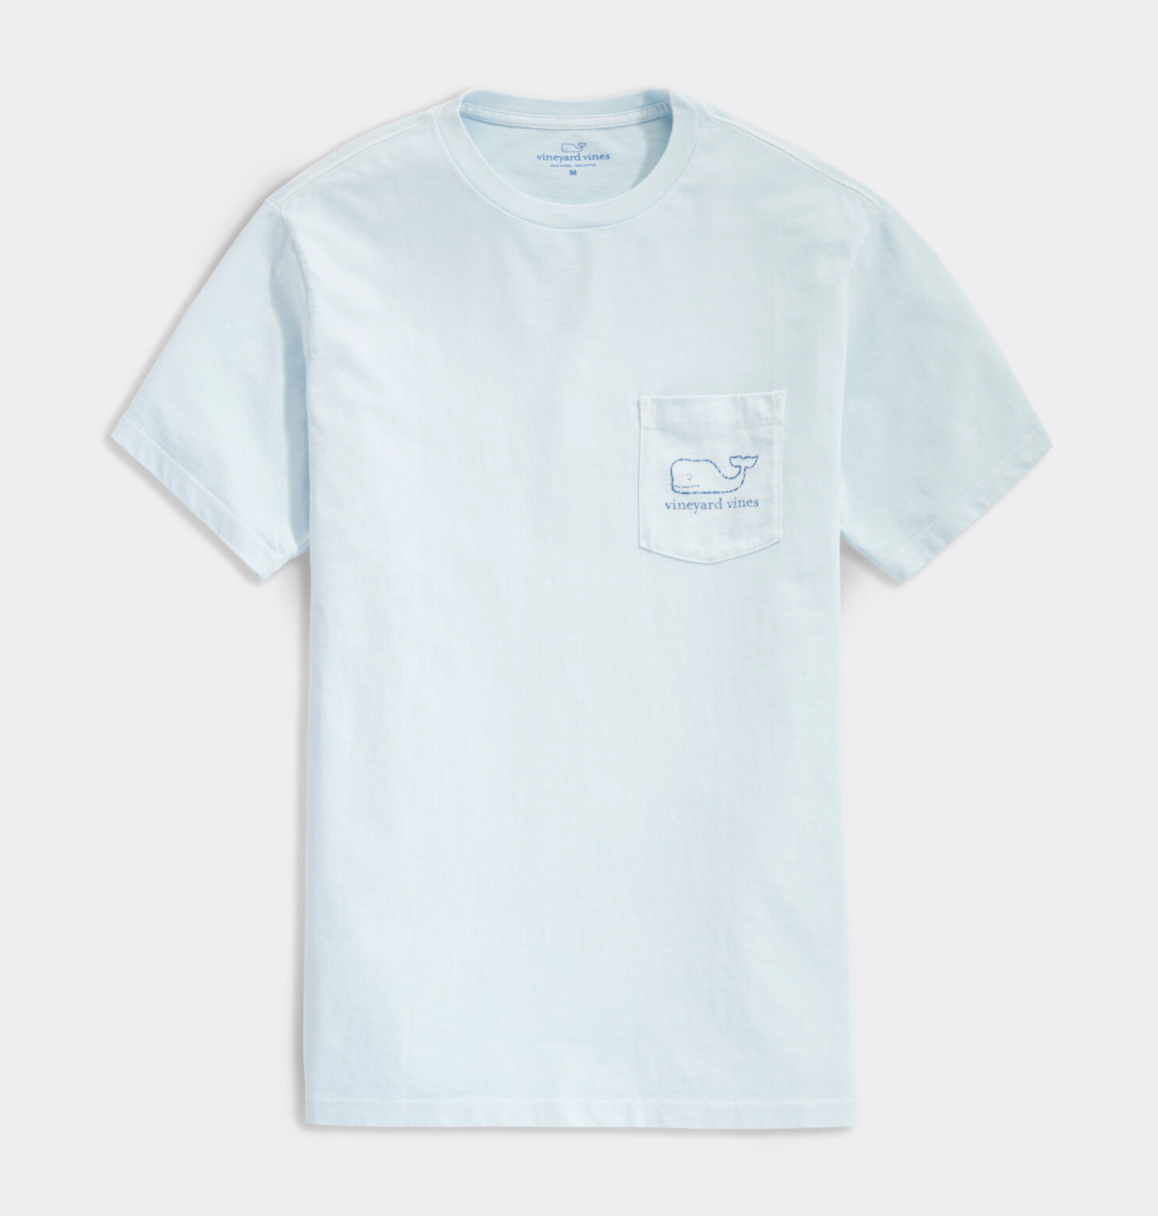 GARMENT DYED VINTAGE WHALE TEE